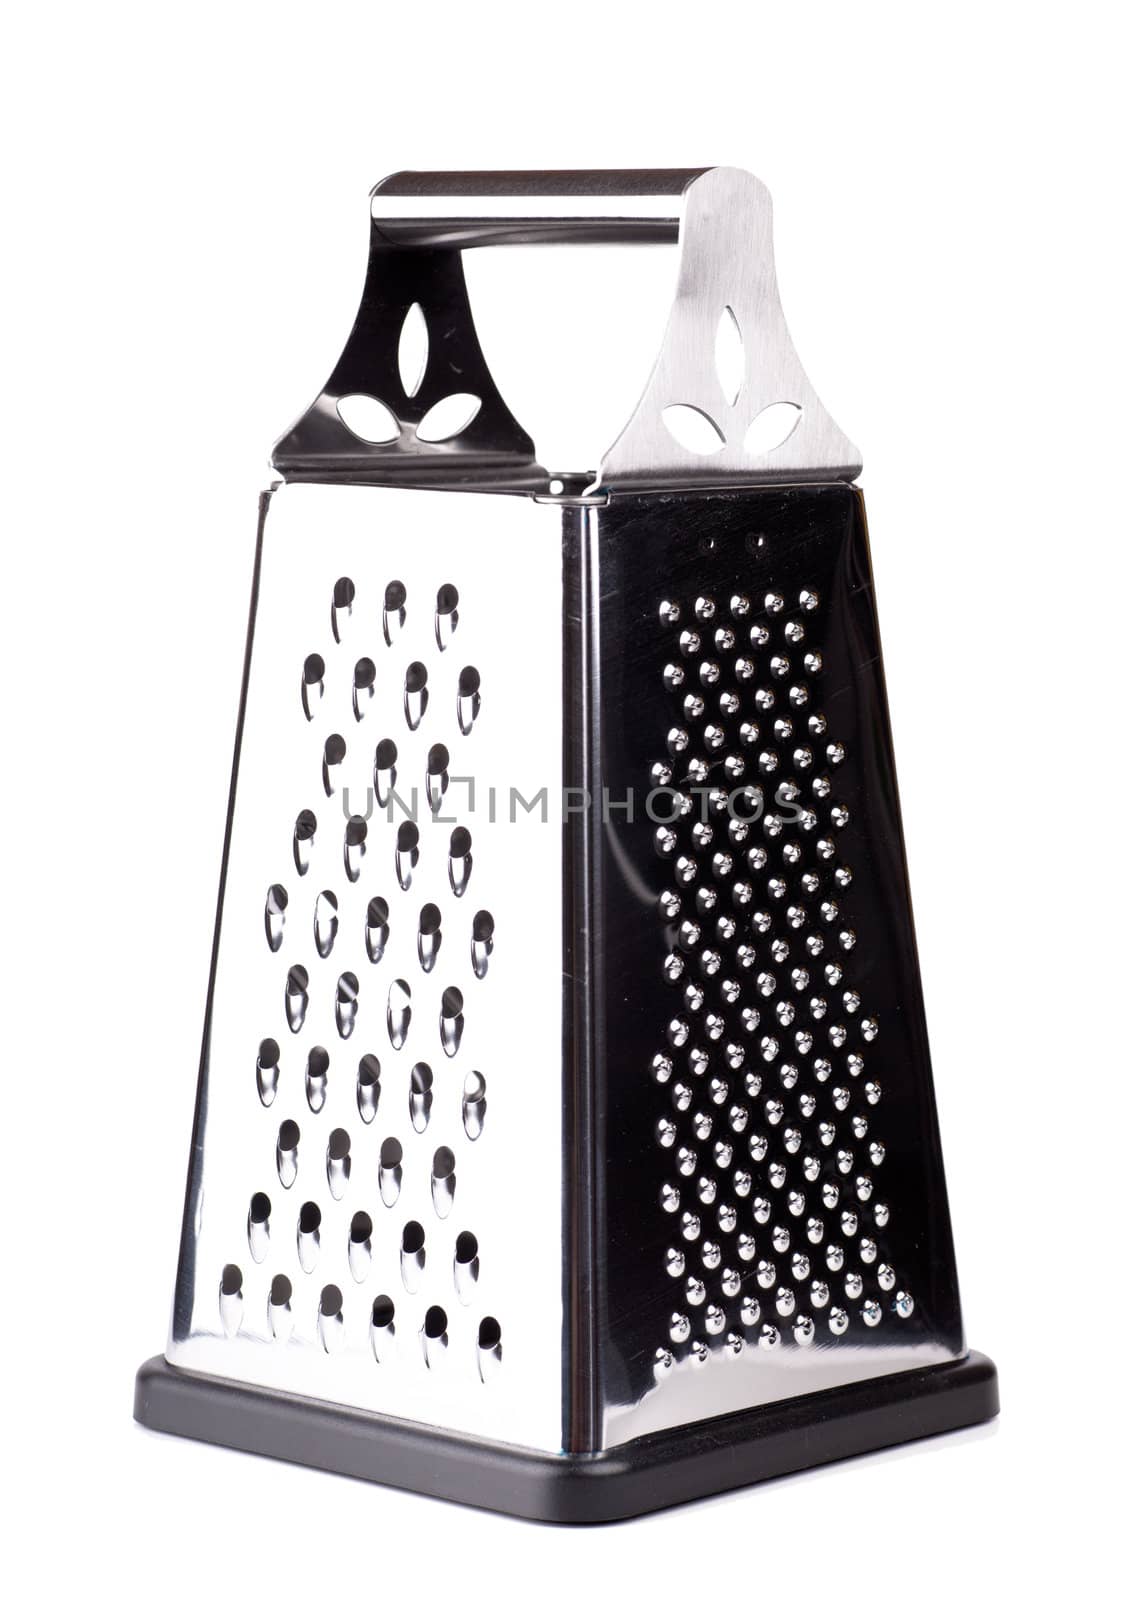 Grater by AGorohov